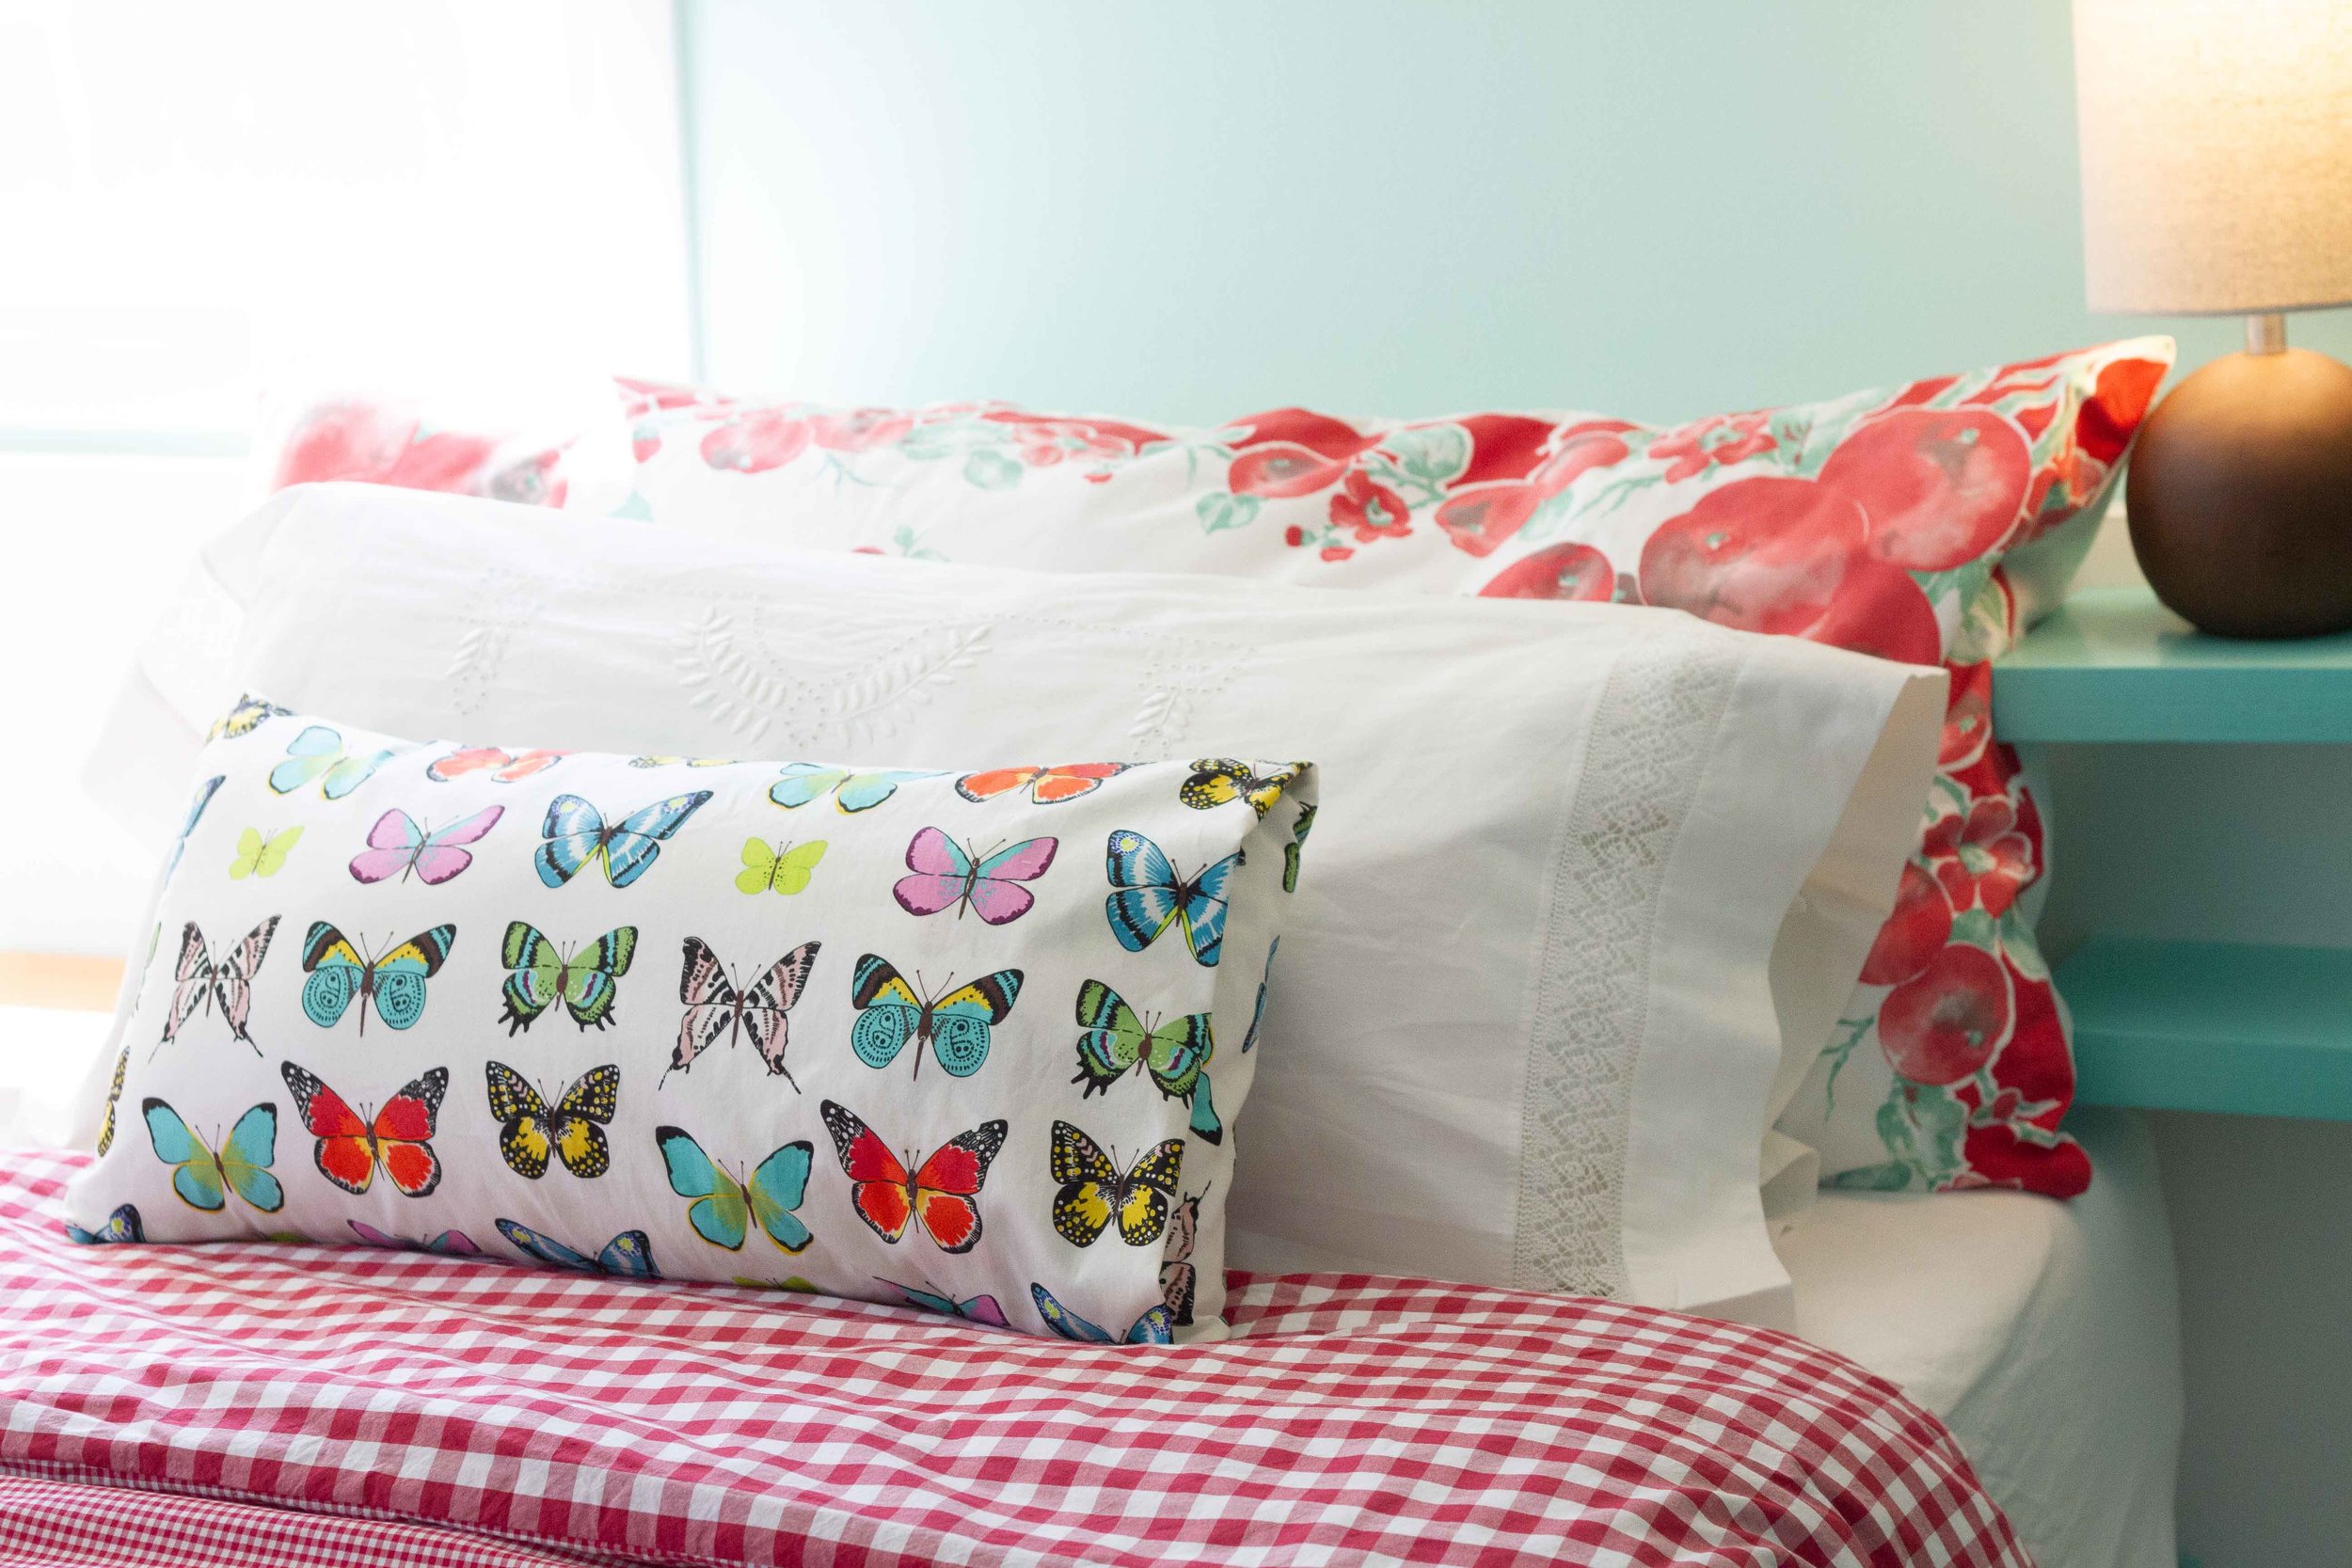 The Easiest Way To Put On A Duvet Cover, How To Put On A Tie Duvet Cover